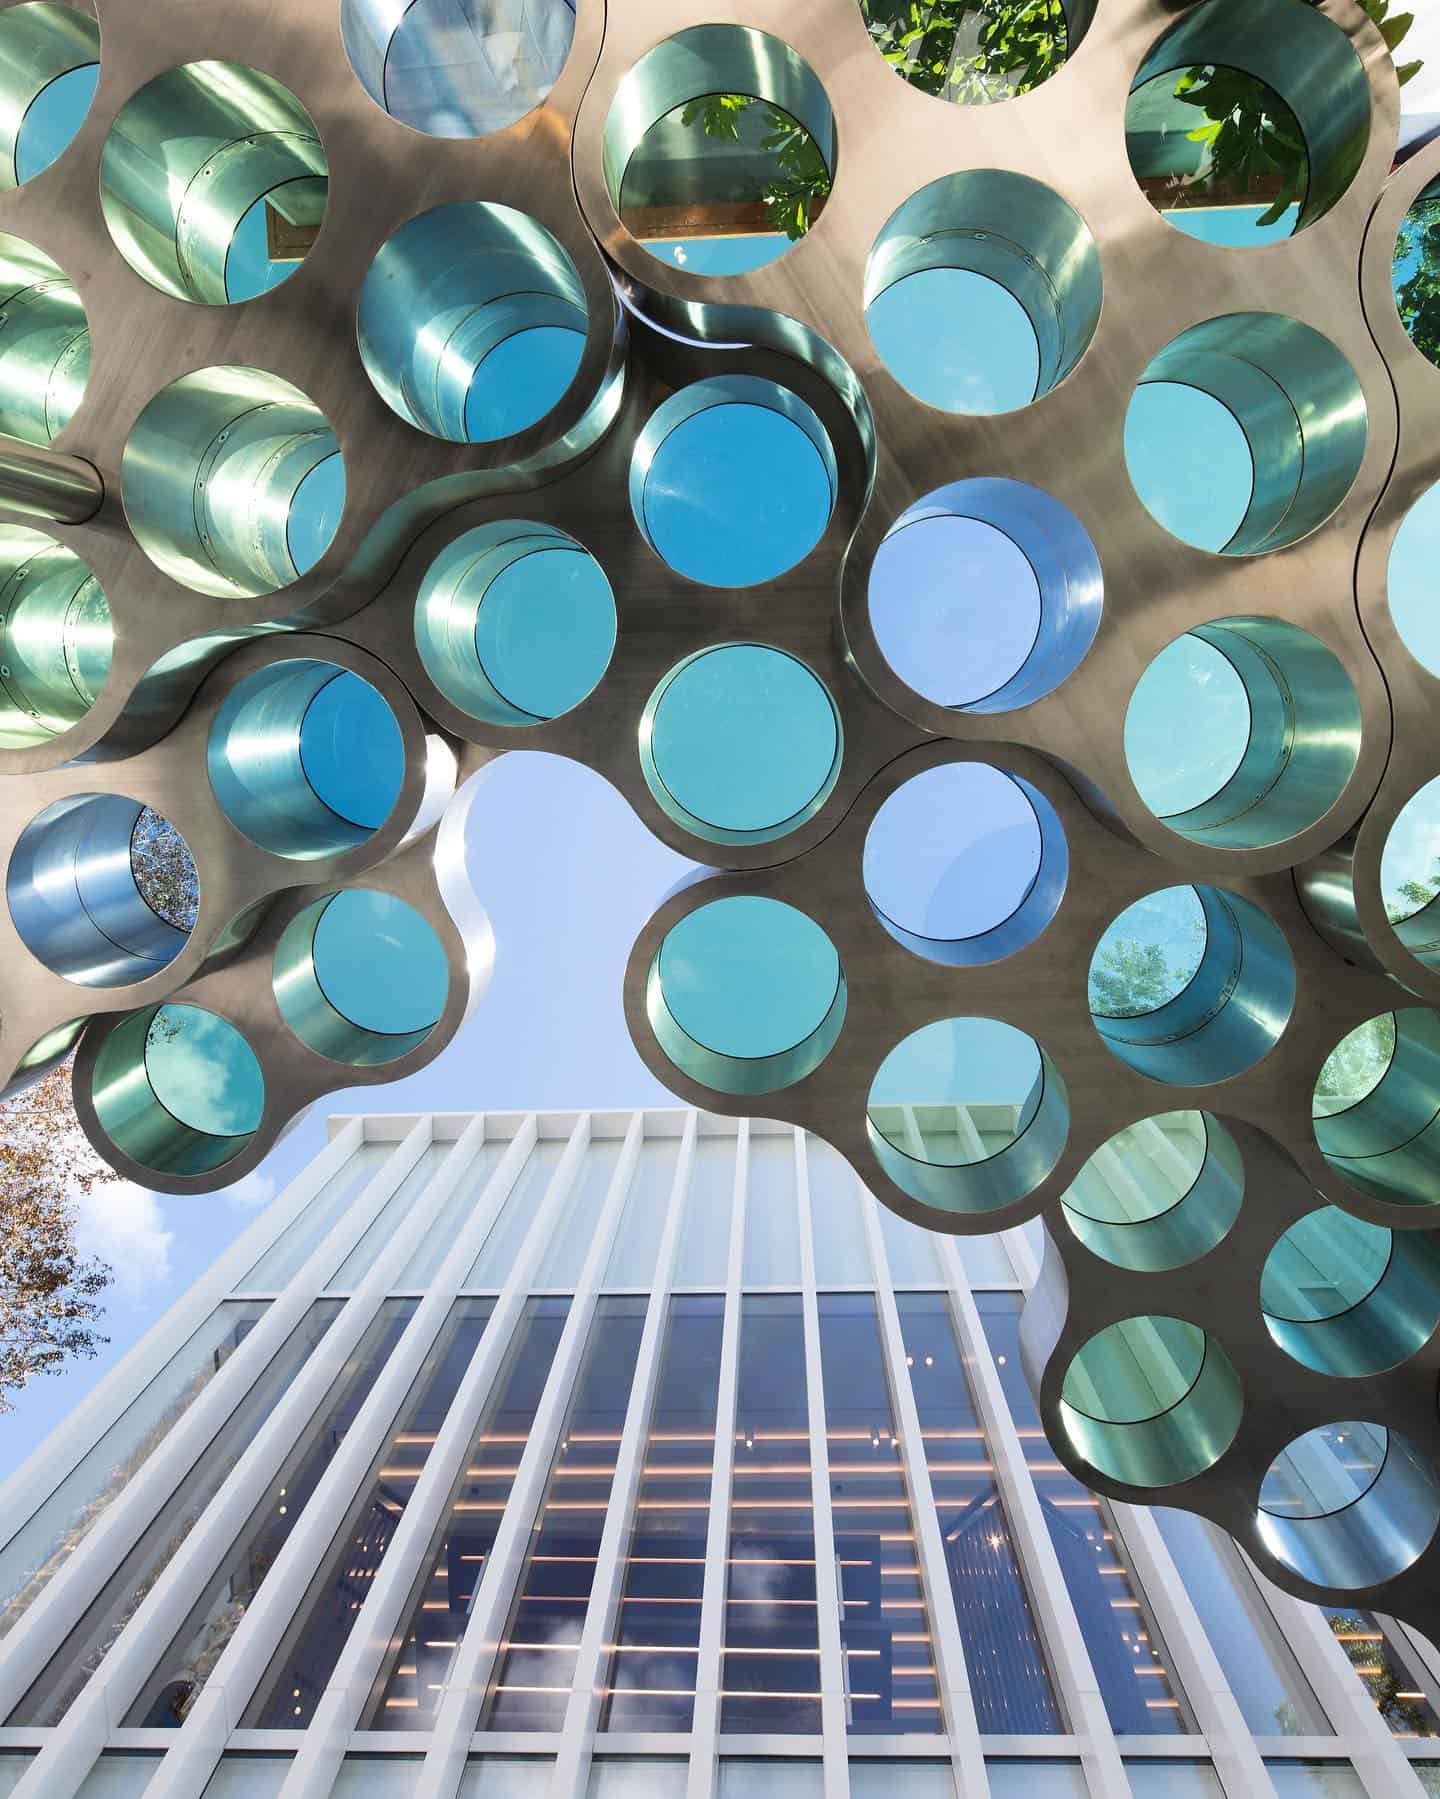 Travel - Walking the Miami Design District and Fly's Eye Dome 